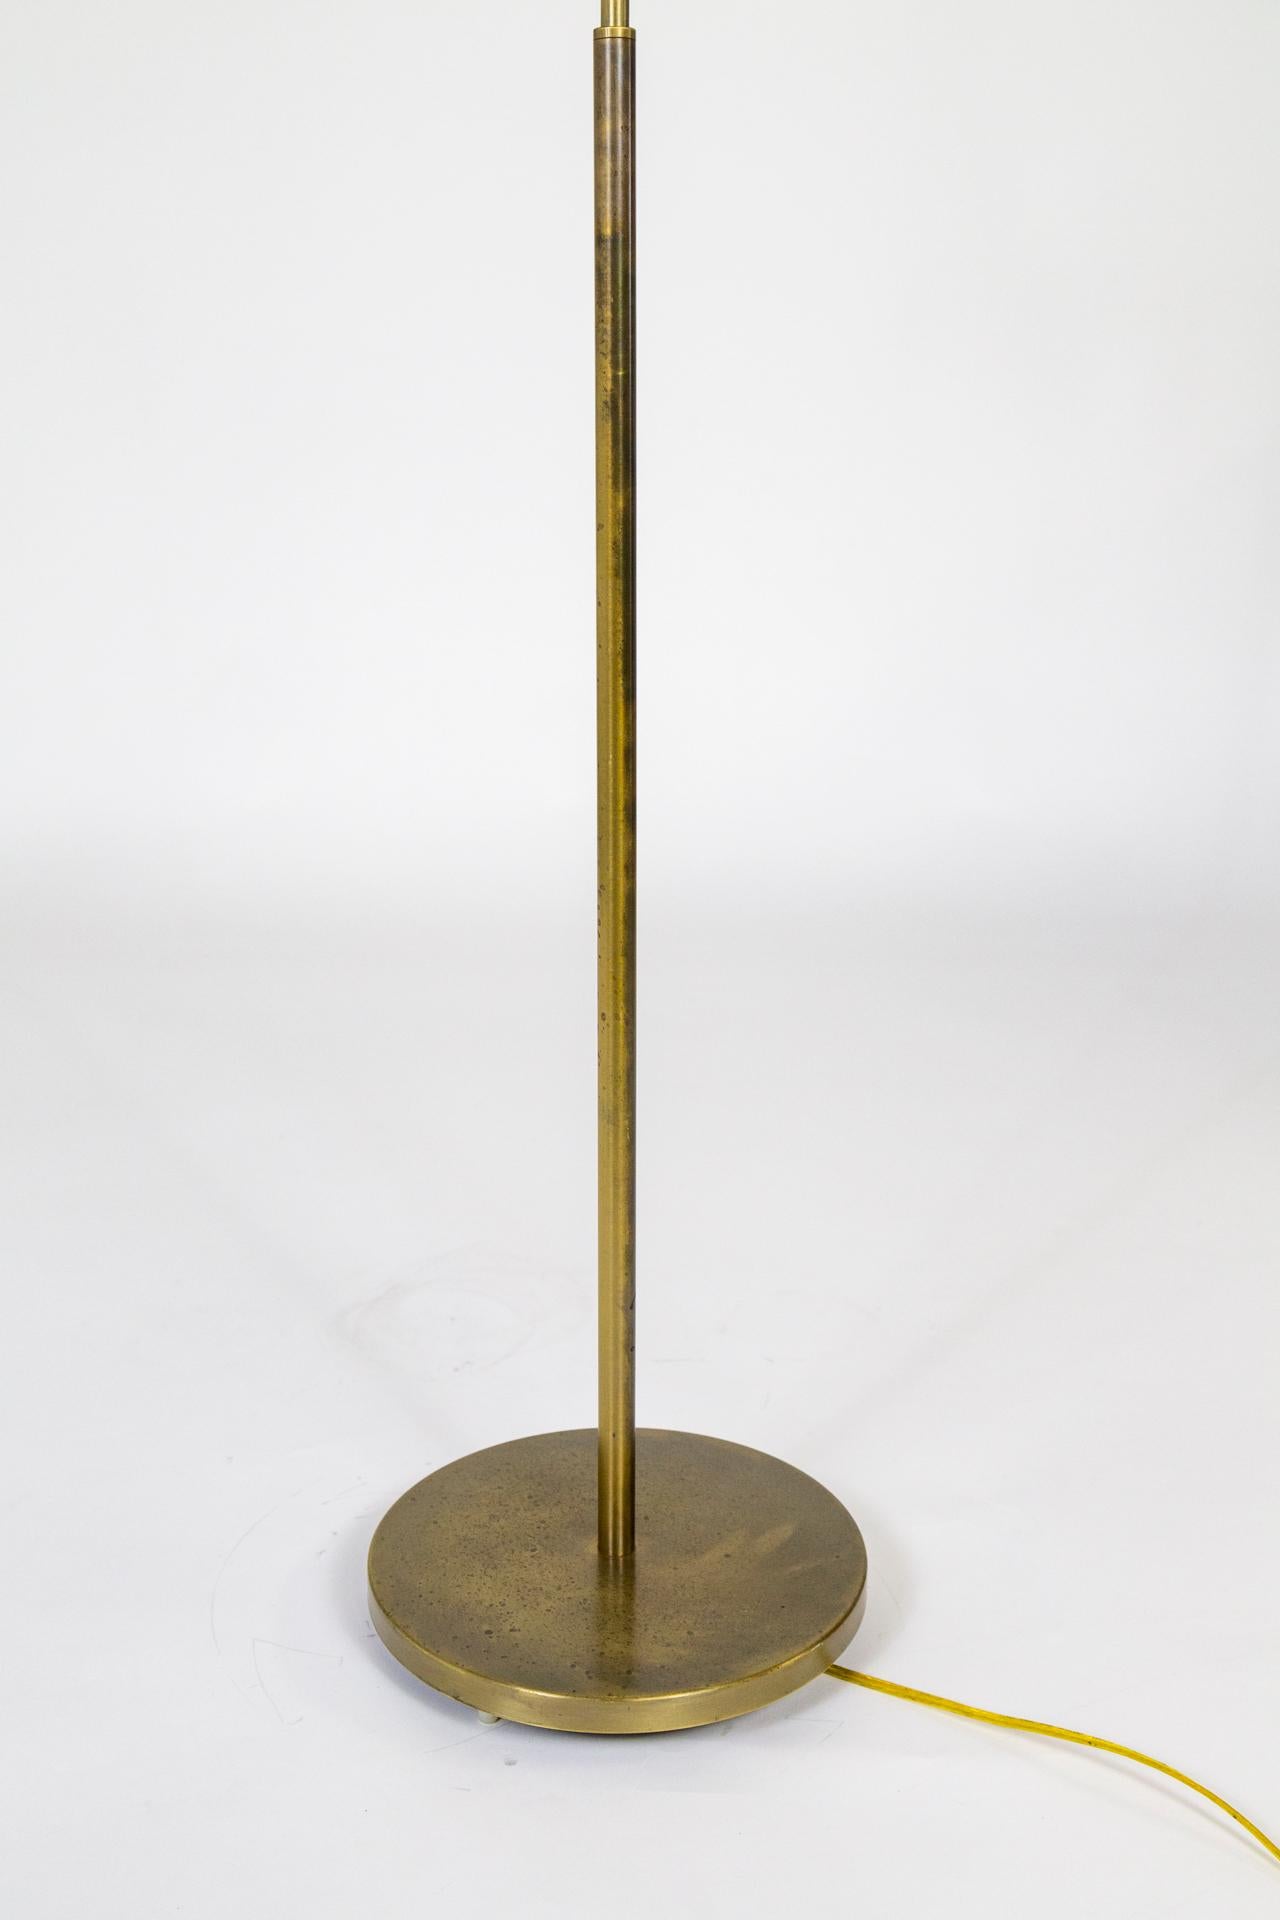 A modern, adjustable pharmacy lamp by Casella. Made of brass with rich, aged patina; round base and a sleek, dome-clamshell shape shade. New dimmer socket and heavy base. Measures: Adjustable height 44-49” x 10